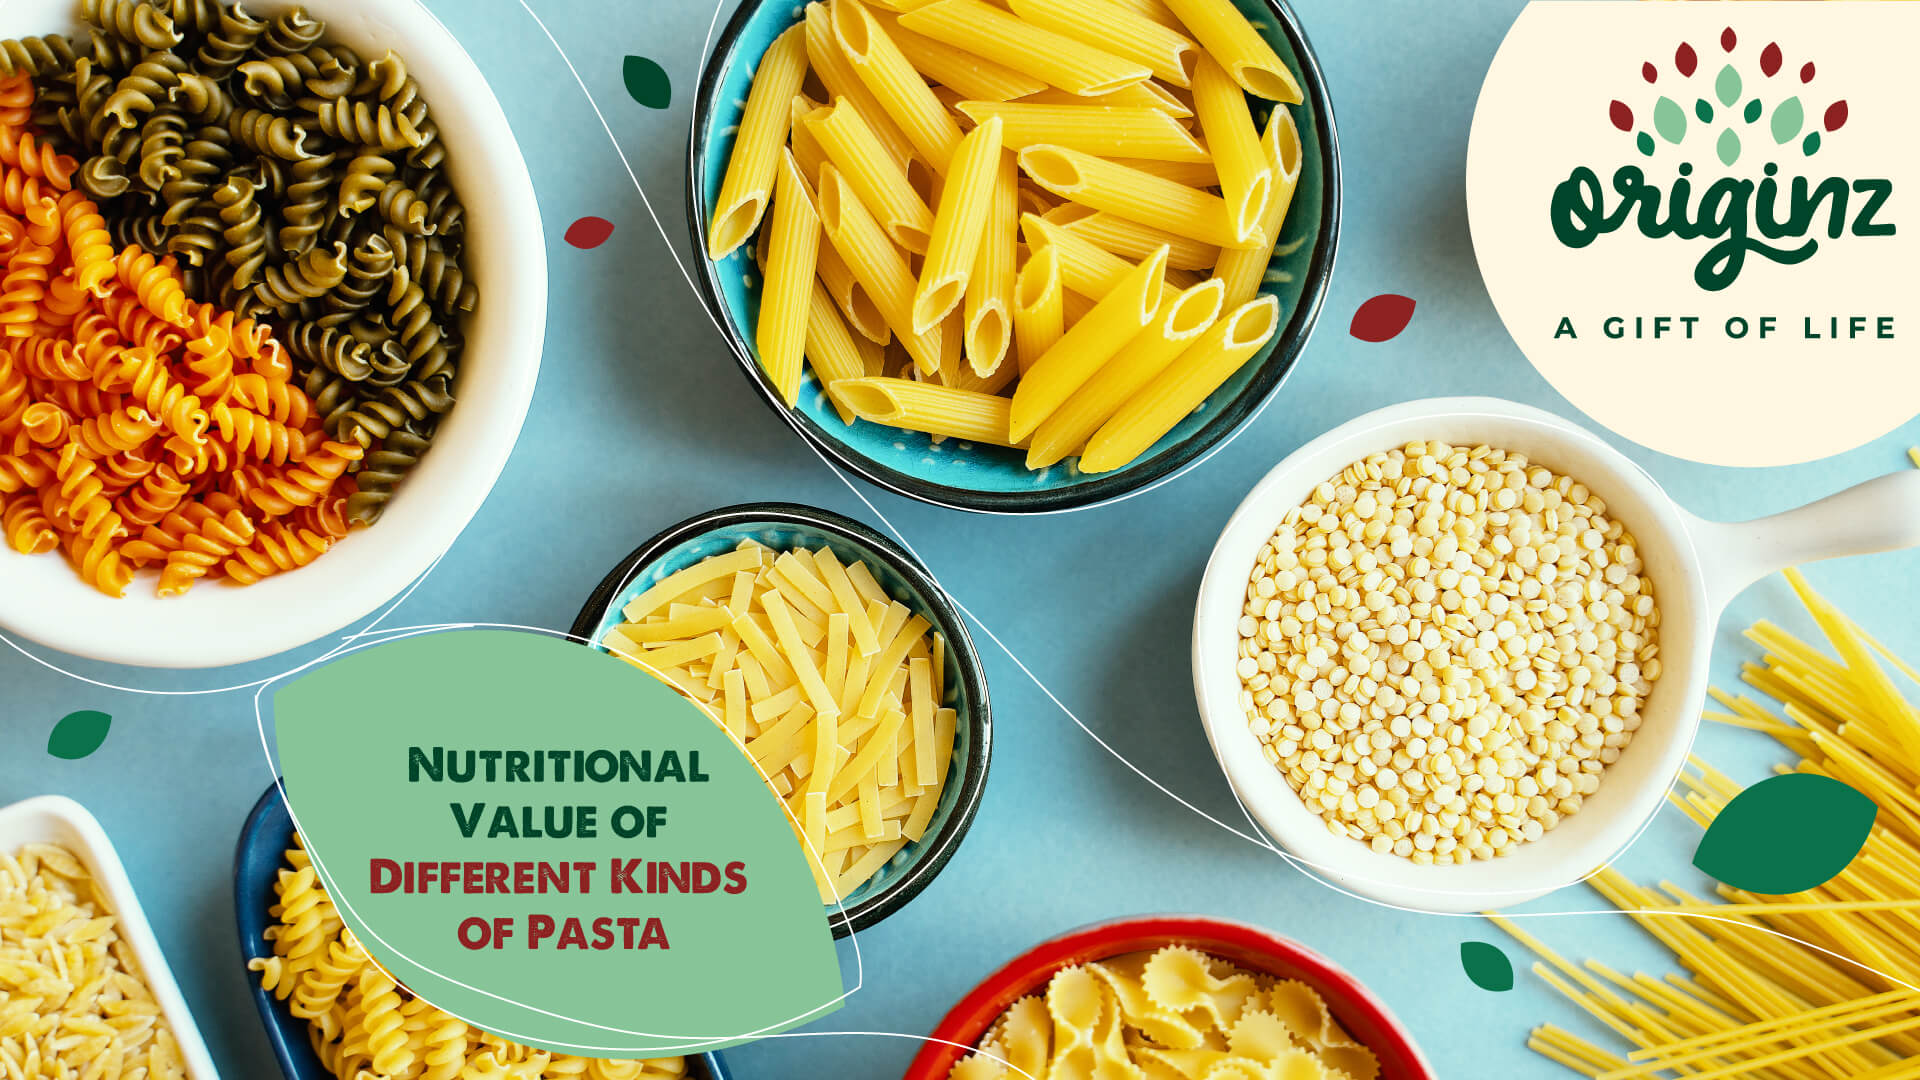 Nutritional Value of Different Kinds of Pasta